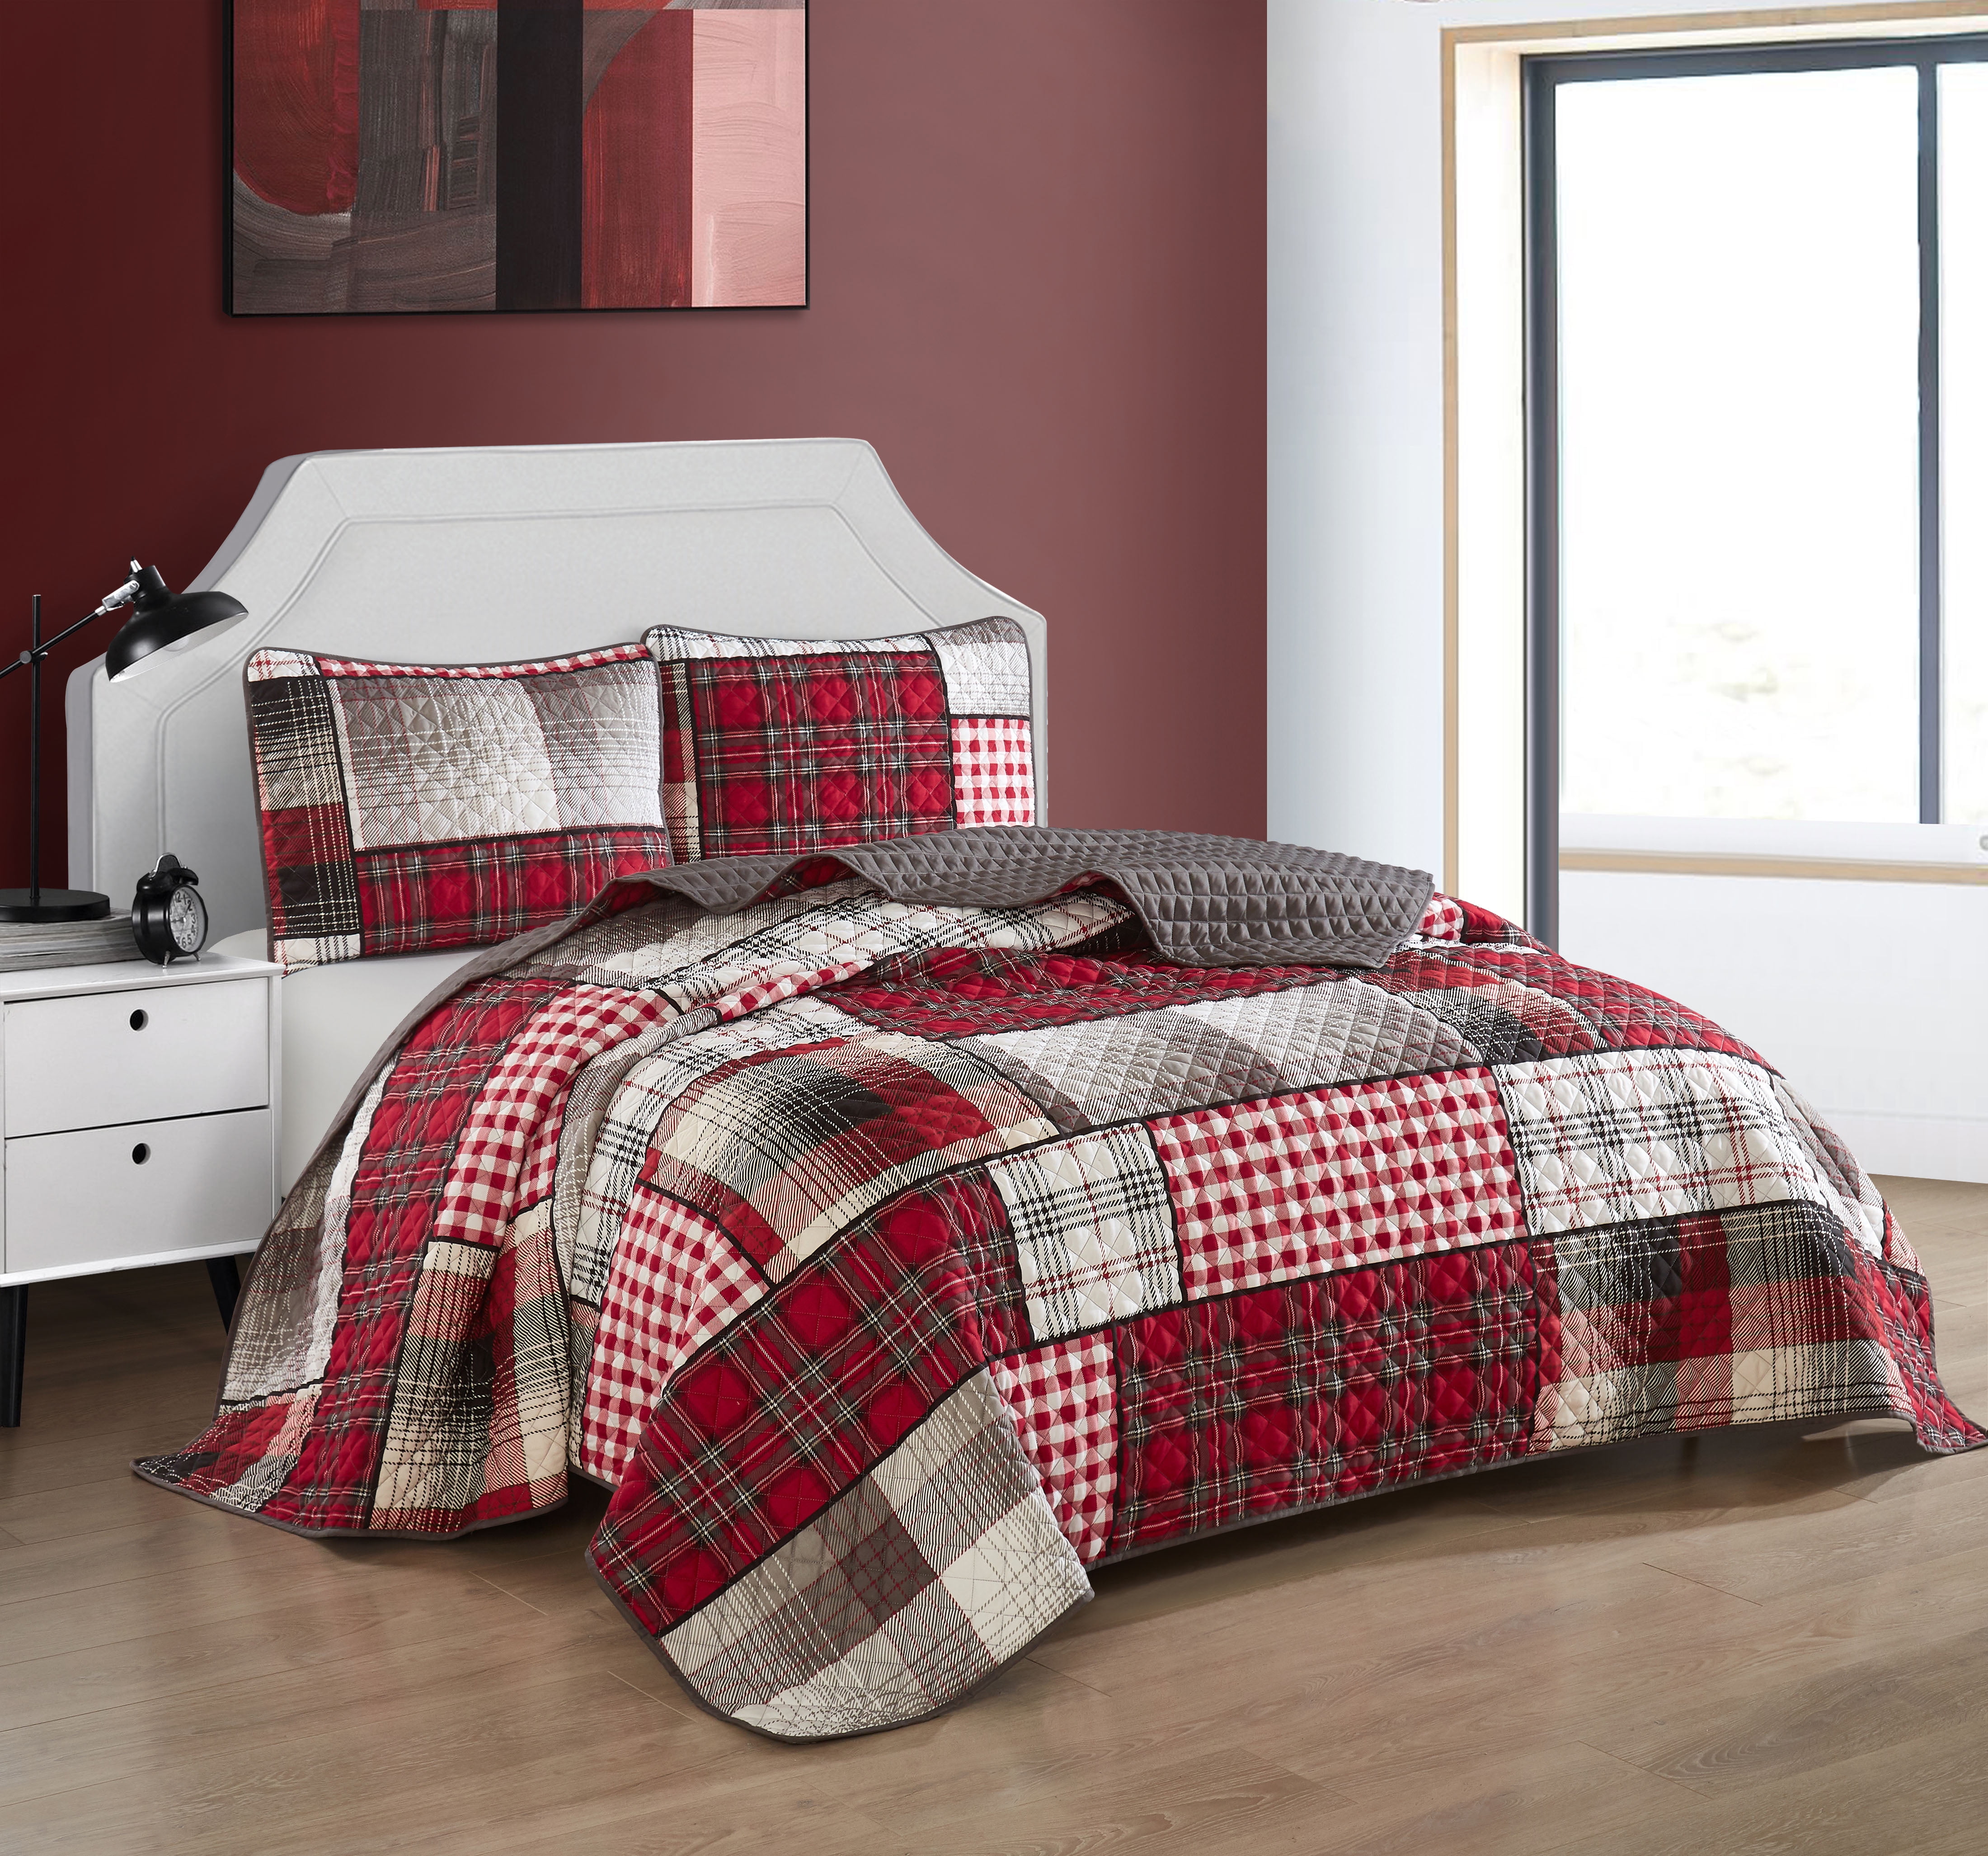 Details about   NEW ~ MODERN SPORTY RED BLUE WHITE GREY NAVY STRIPE BOYS QUILT COMFORTER SET 